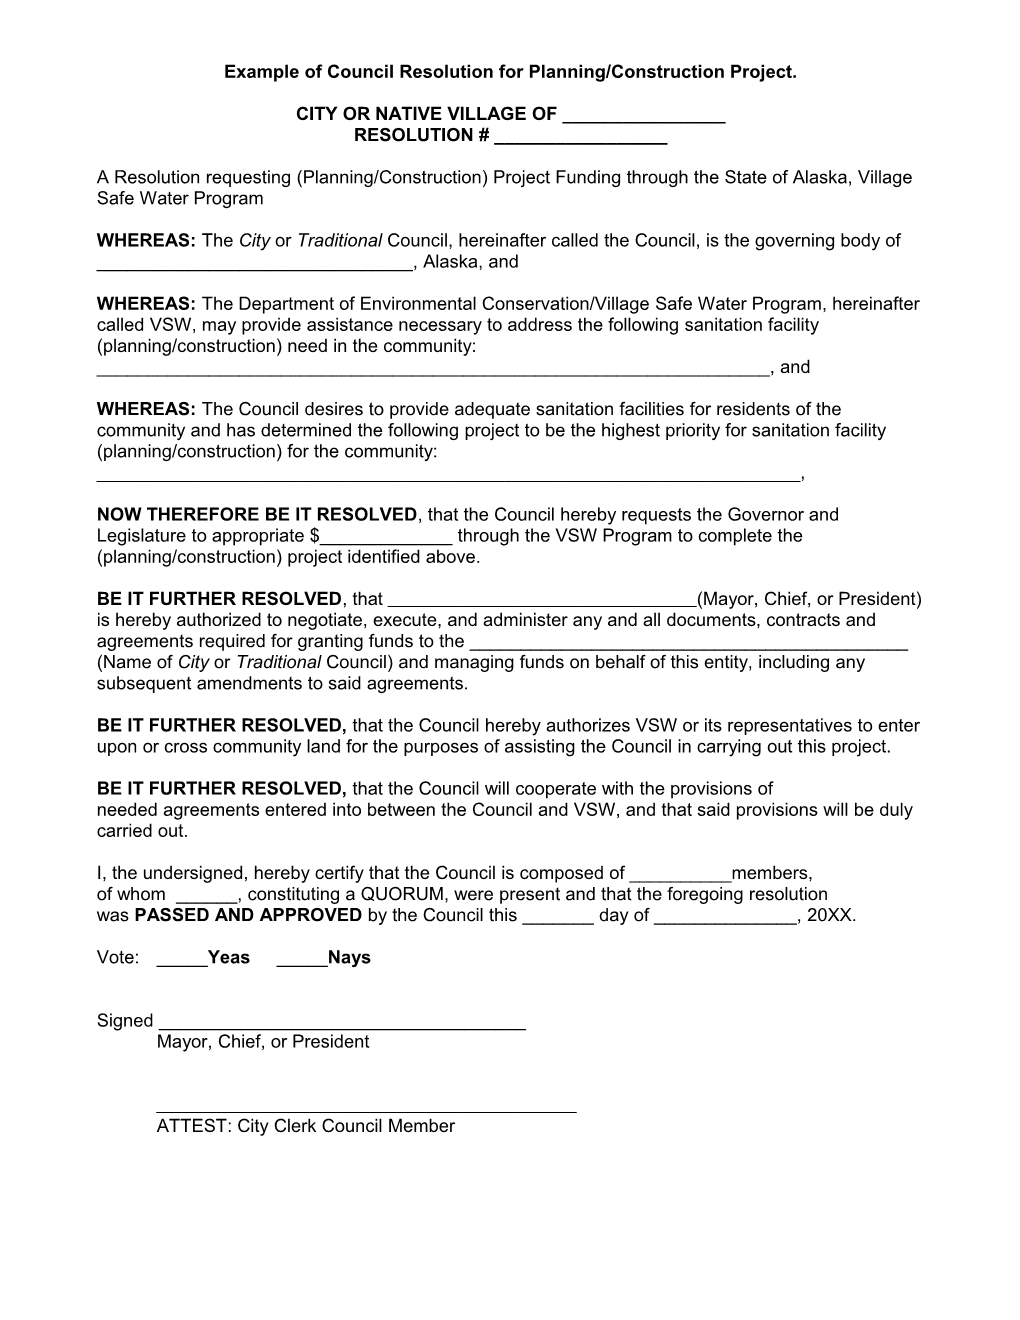 Example of Council Resolution for Planning/Construction Project